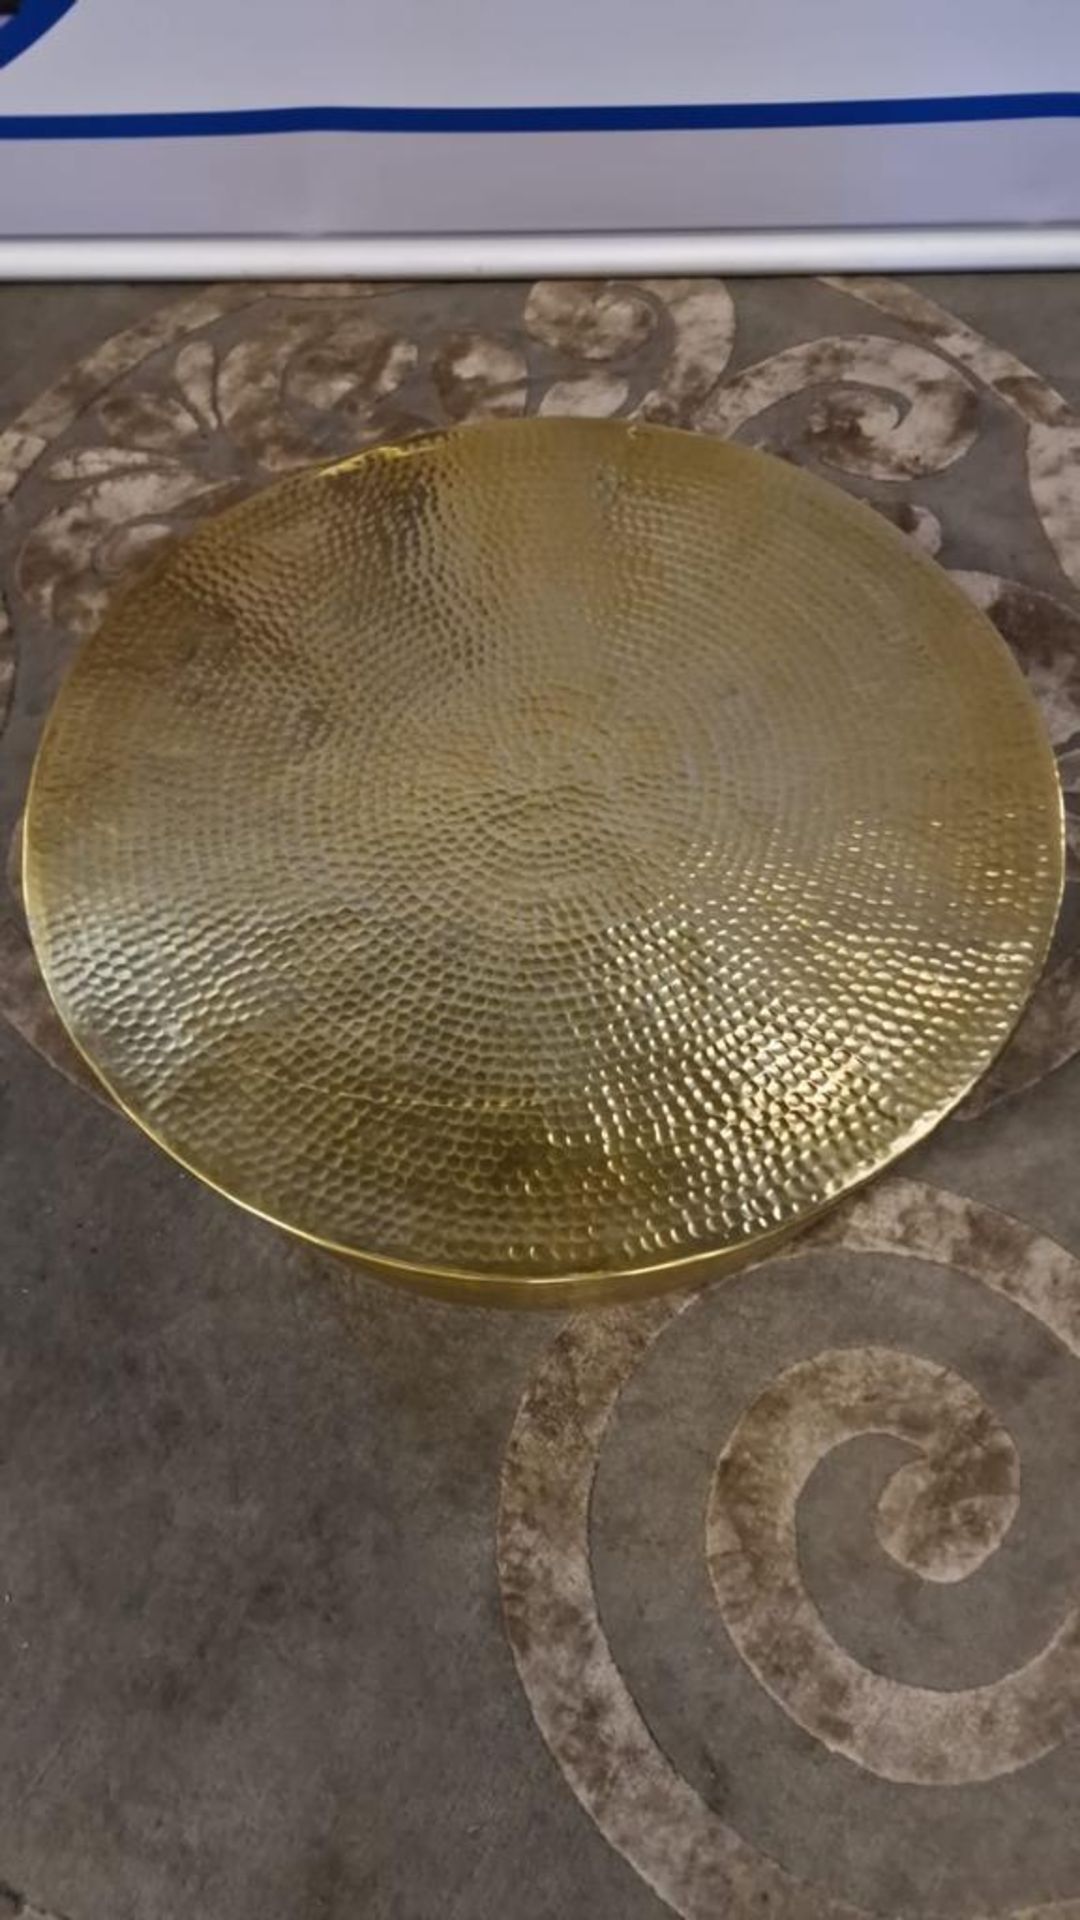 Paloma Gold Hammered Aluminium Coffee Table Ideal As A Centrepiece For Your Relaxation Space, This - Image 3 of 3